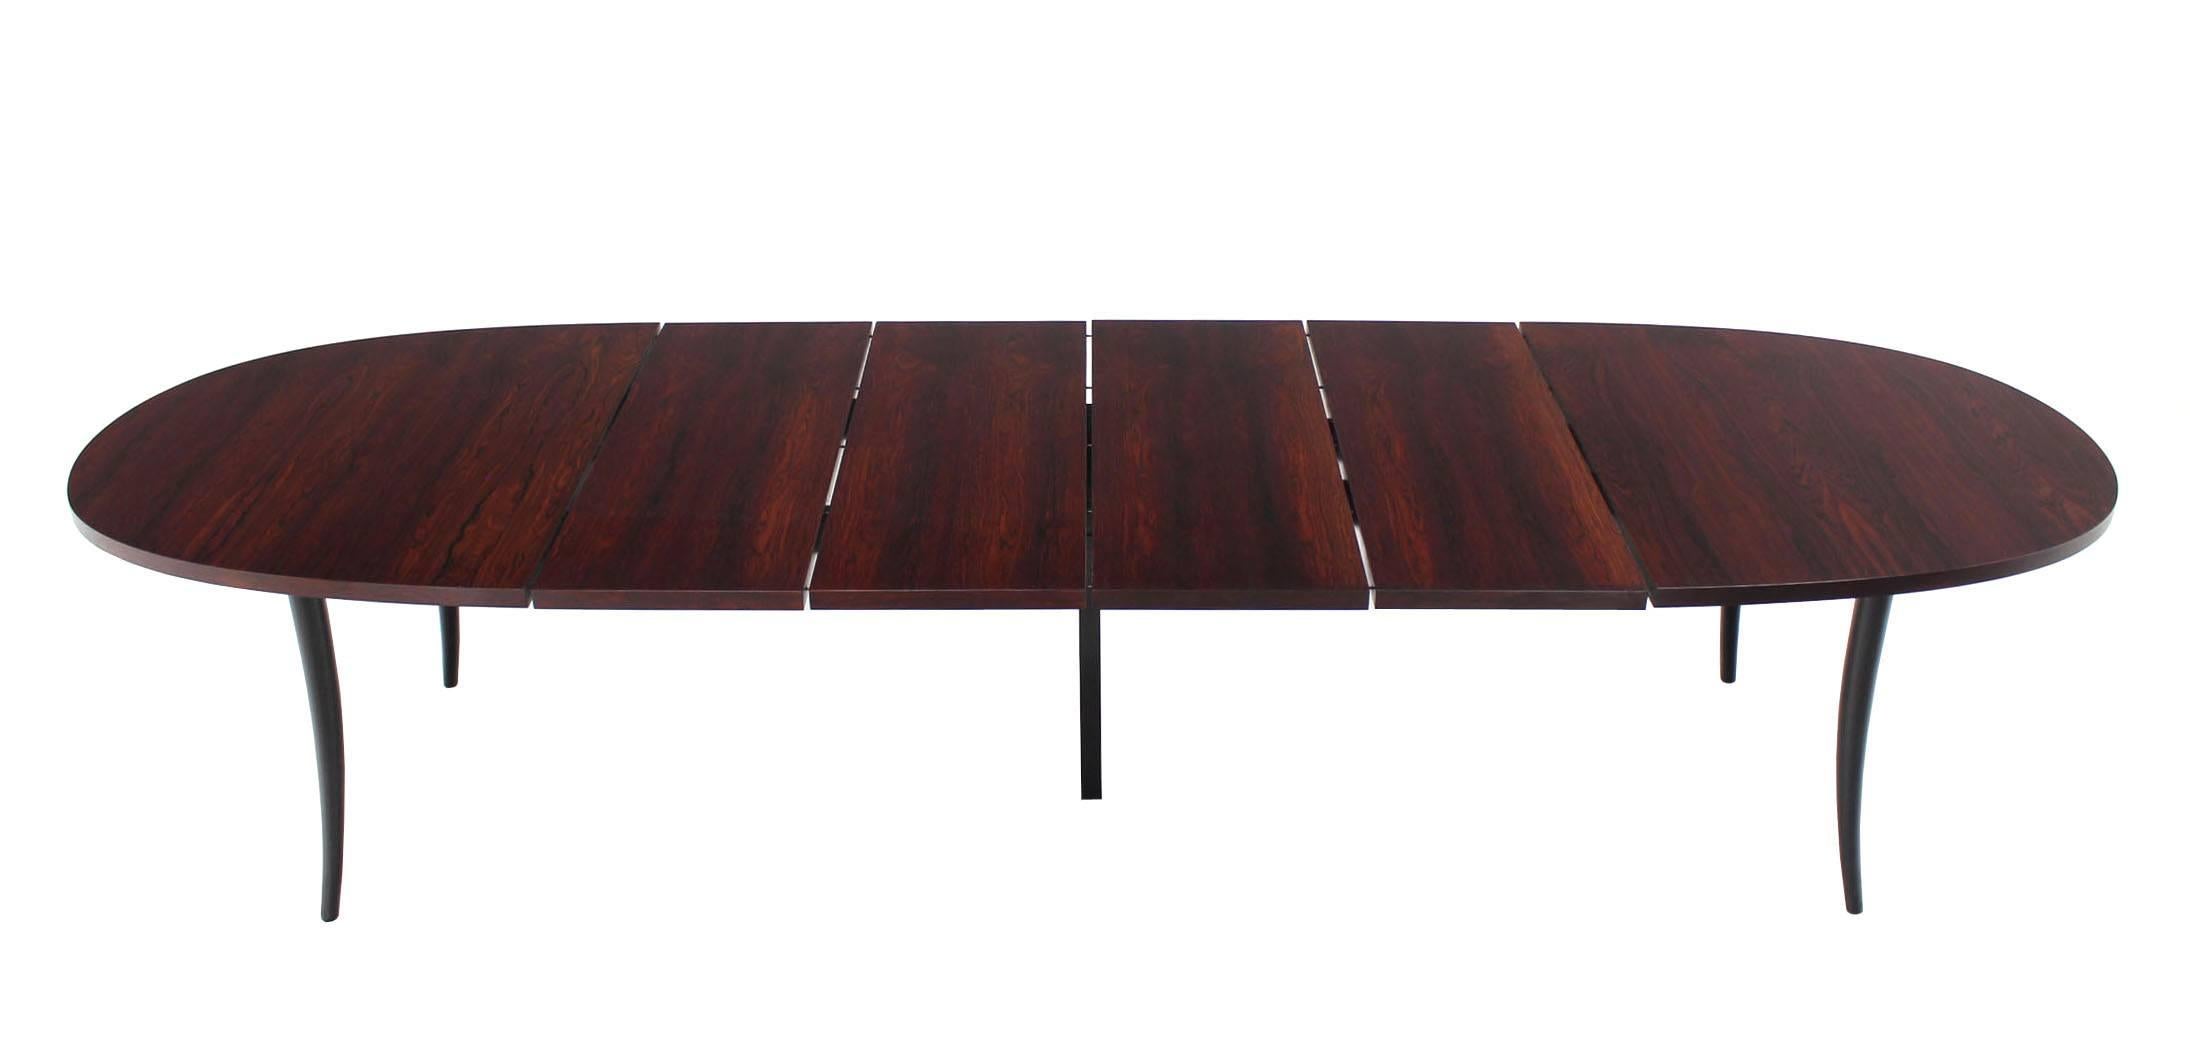 American Oval Rosewood Dining Table on Tapered Horn-Shaped Legs Harvey Probber